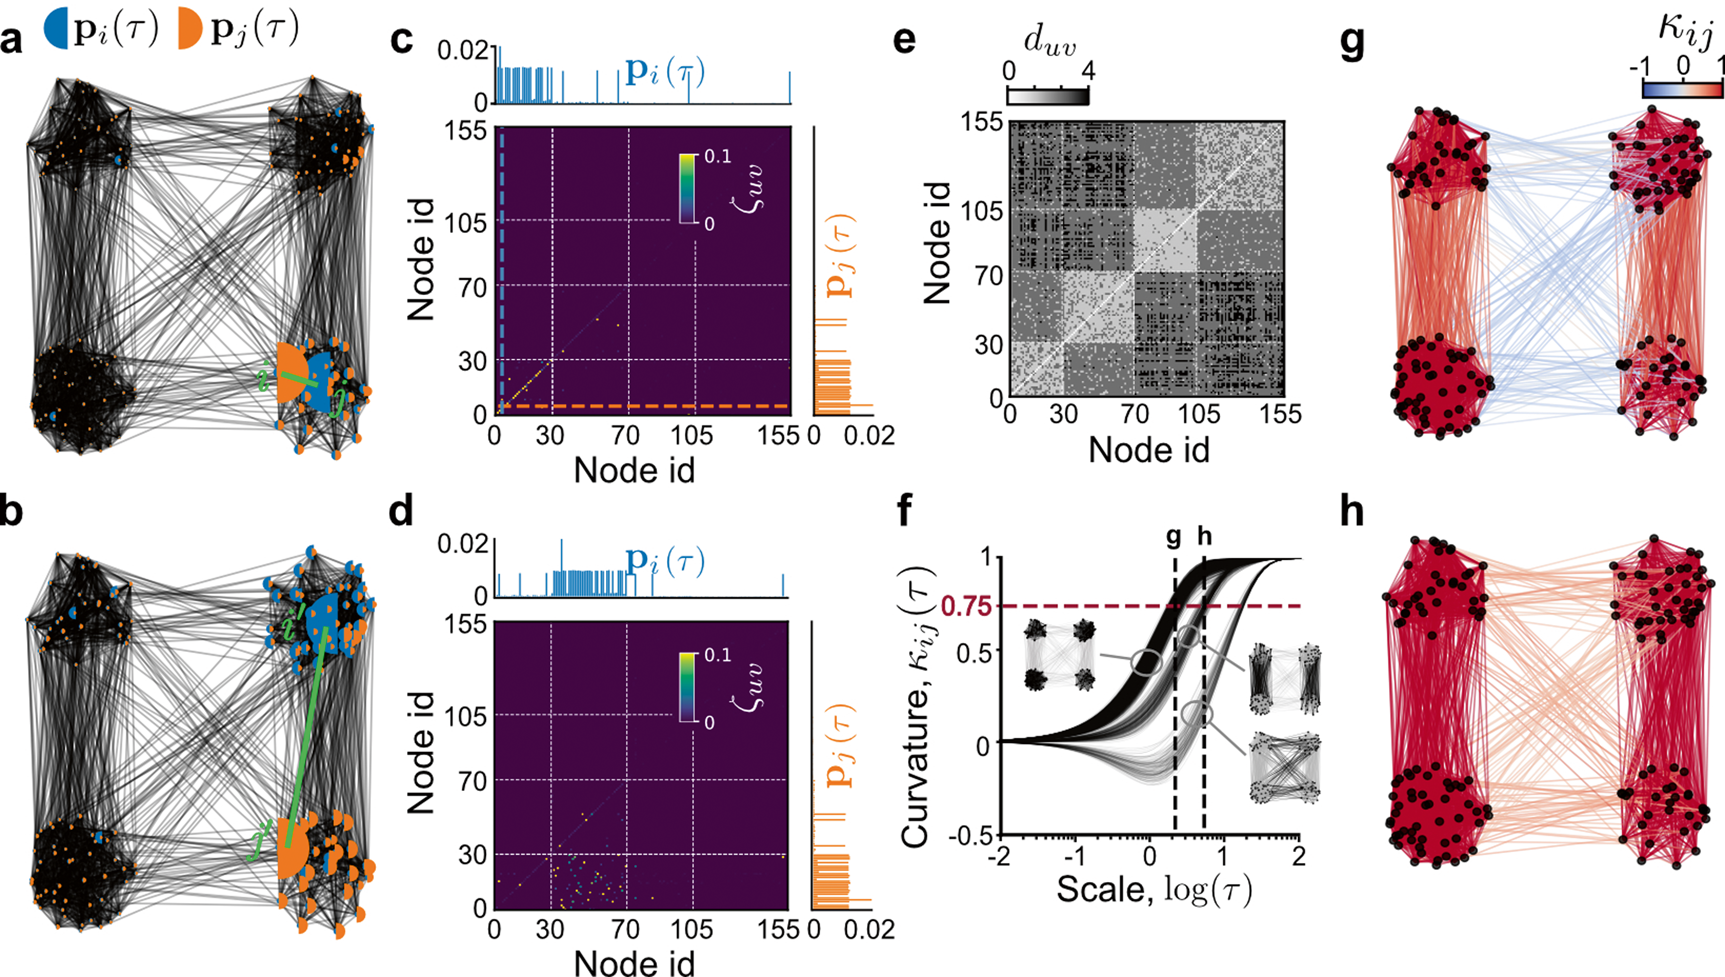 Unfolding the multiscale structure of networks with dynamical  Ollivier-Ricci curvature | Nature Communications